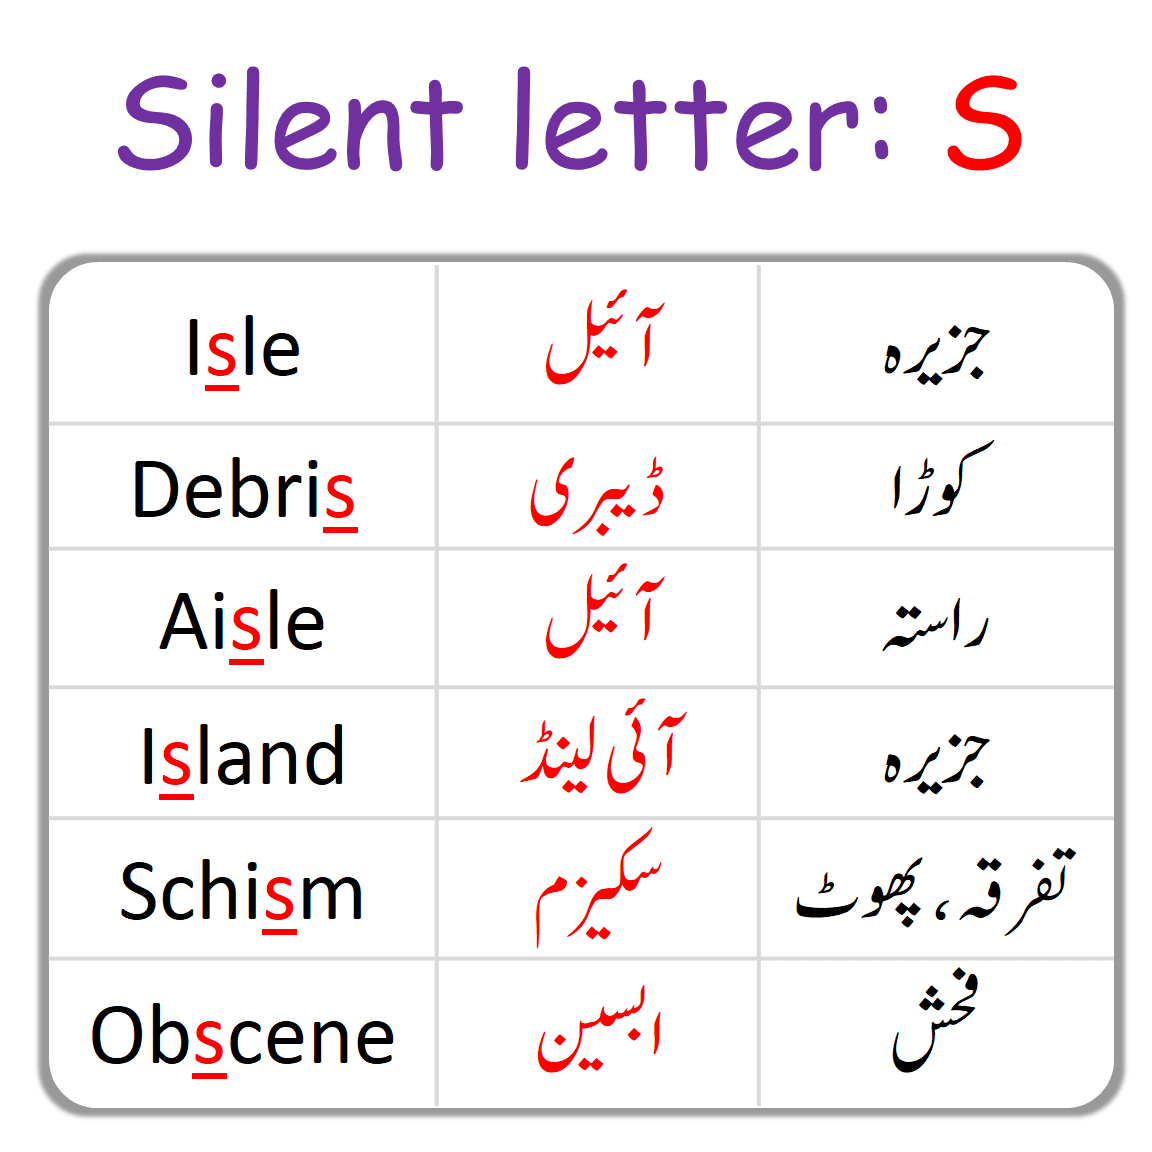 S Silent Letter in English with Urdu Examples